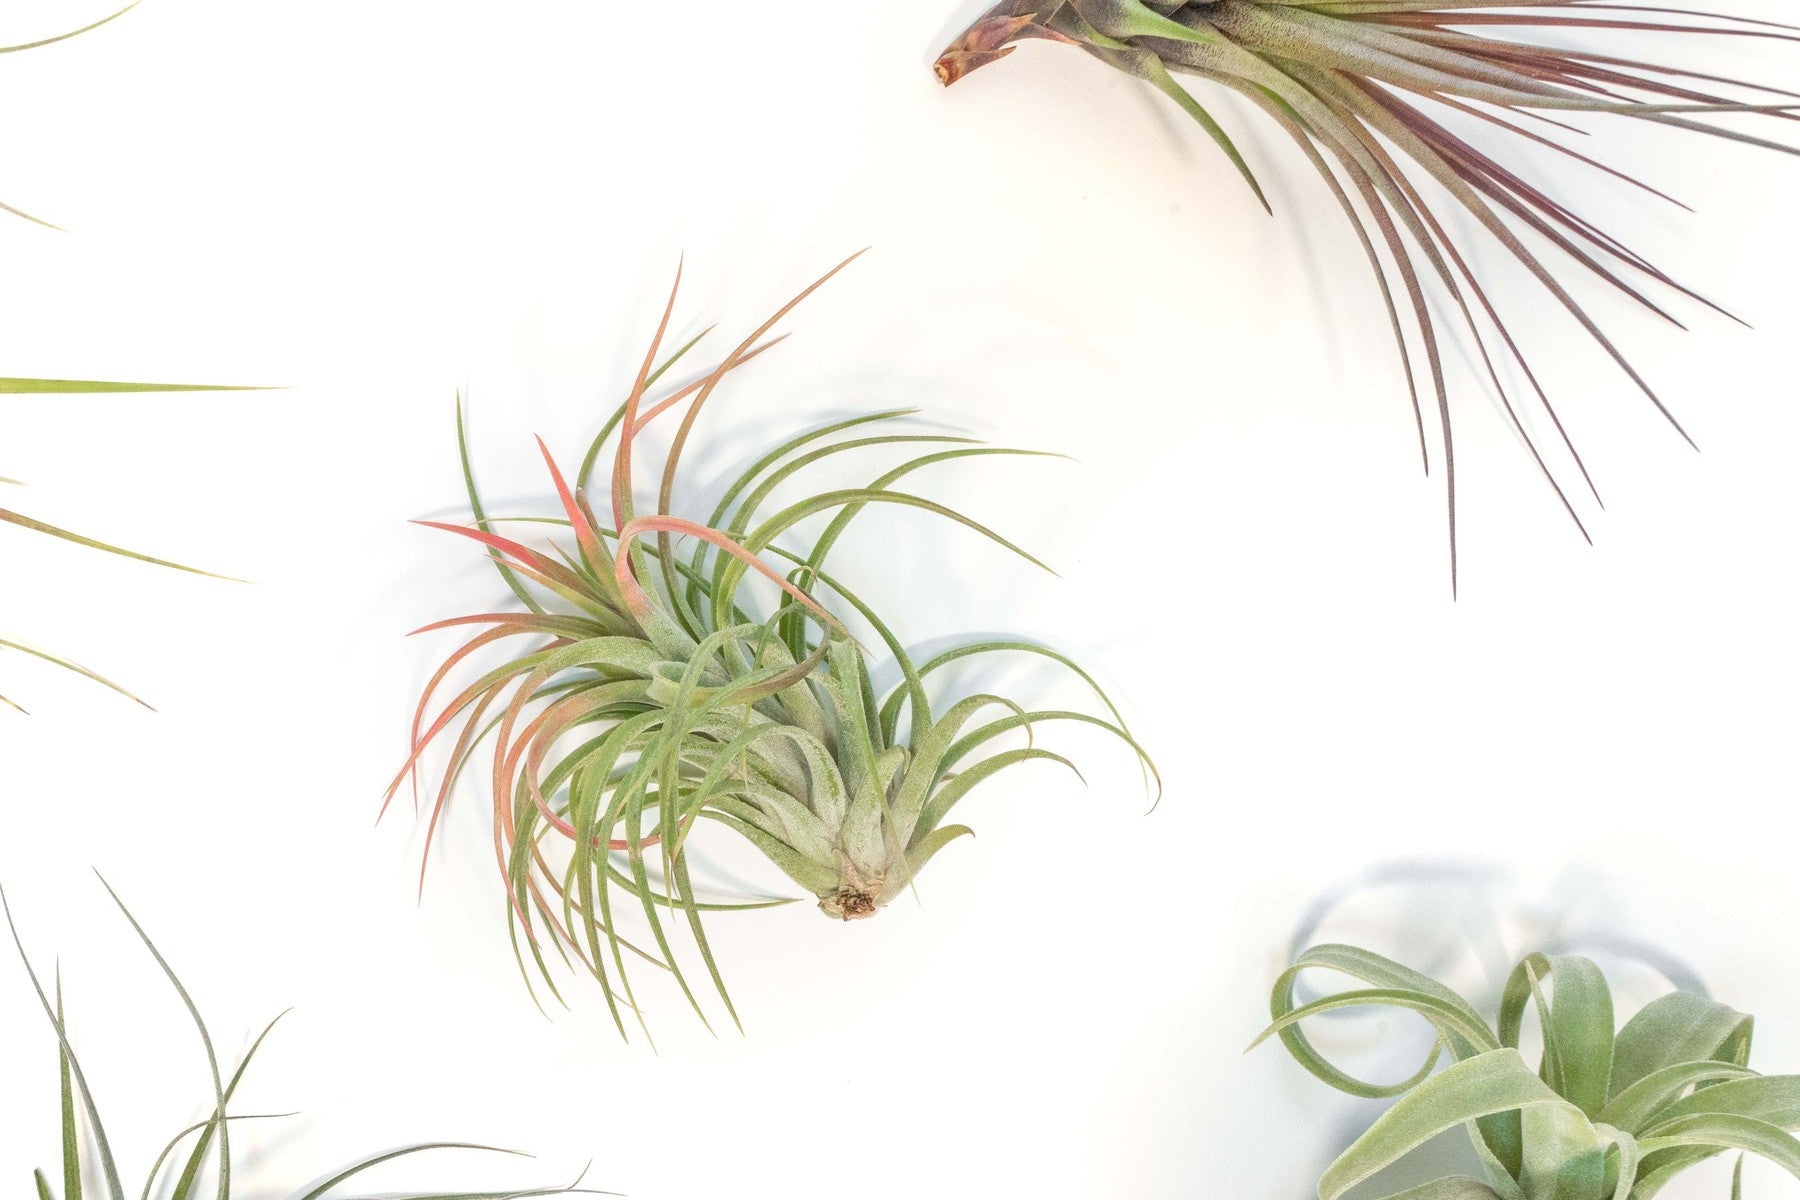 SALE - Collector's Choice Variety of Tillandsia Air Plants - 40% Off-airplant-The Succulent Source